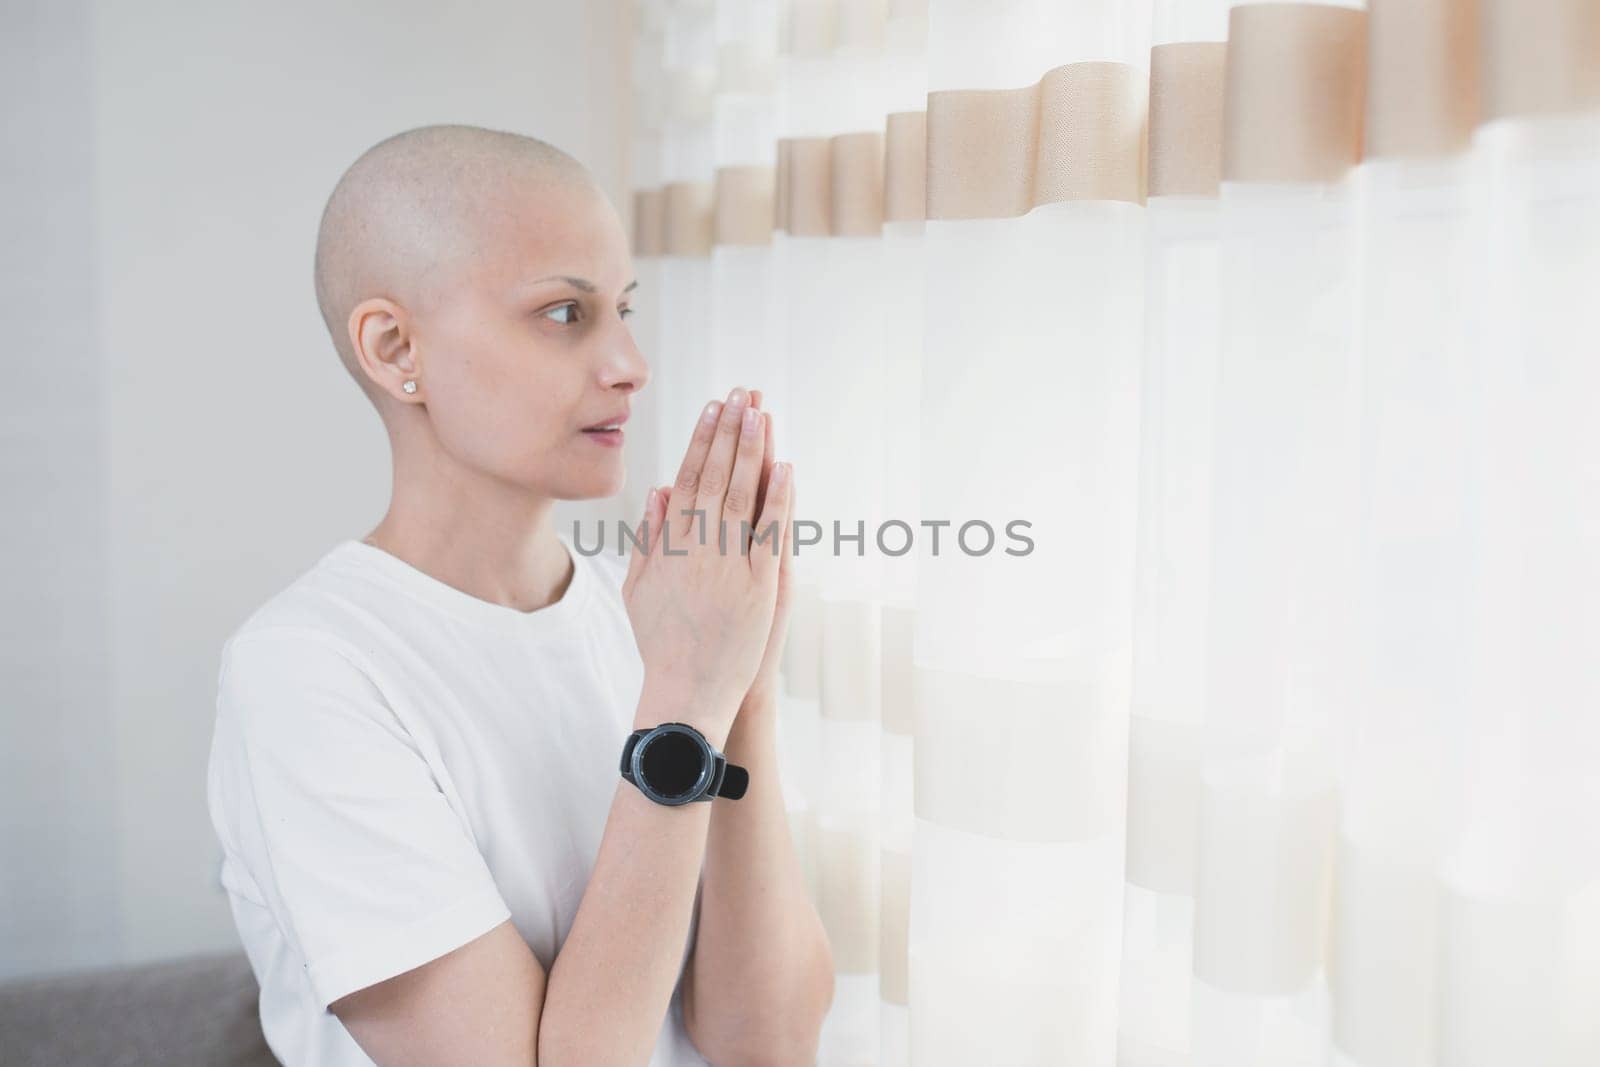 A woman with cancer after chemotherapy thanks the Lord for a successful recovery by Rom4ek